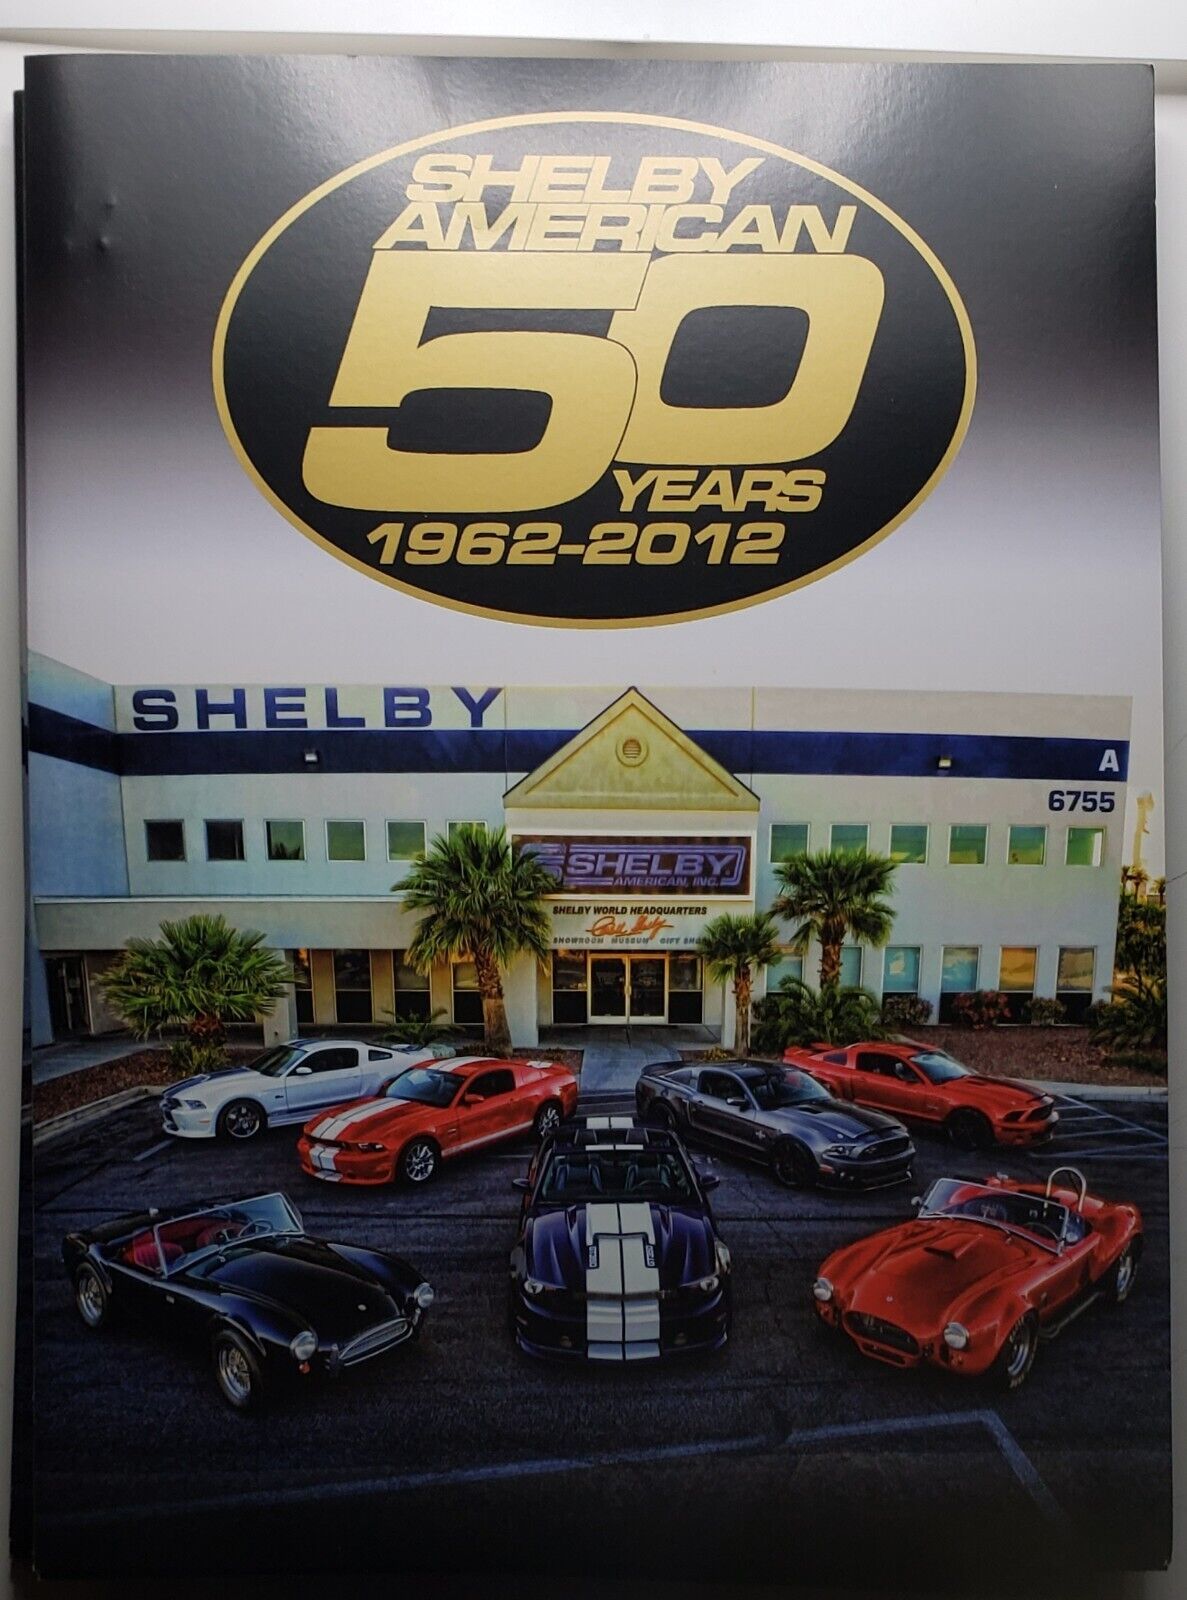 GENUINE SHELBY AMERICAN 2012 50TH ANNIVERSARY SPONSORSHIP PROPOSALS 